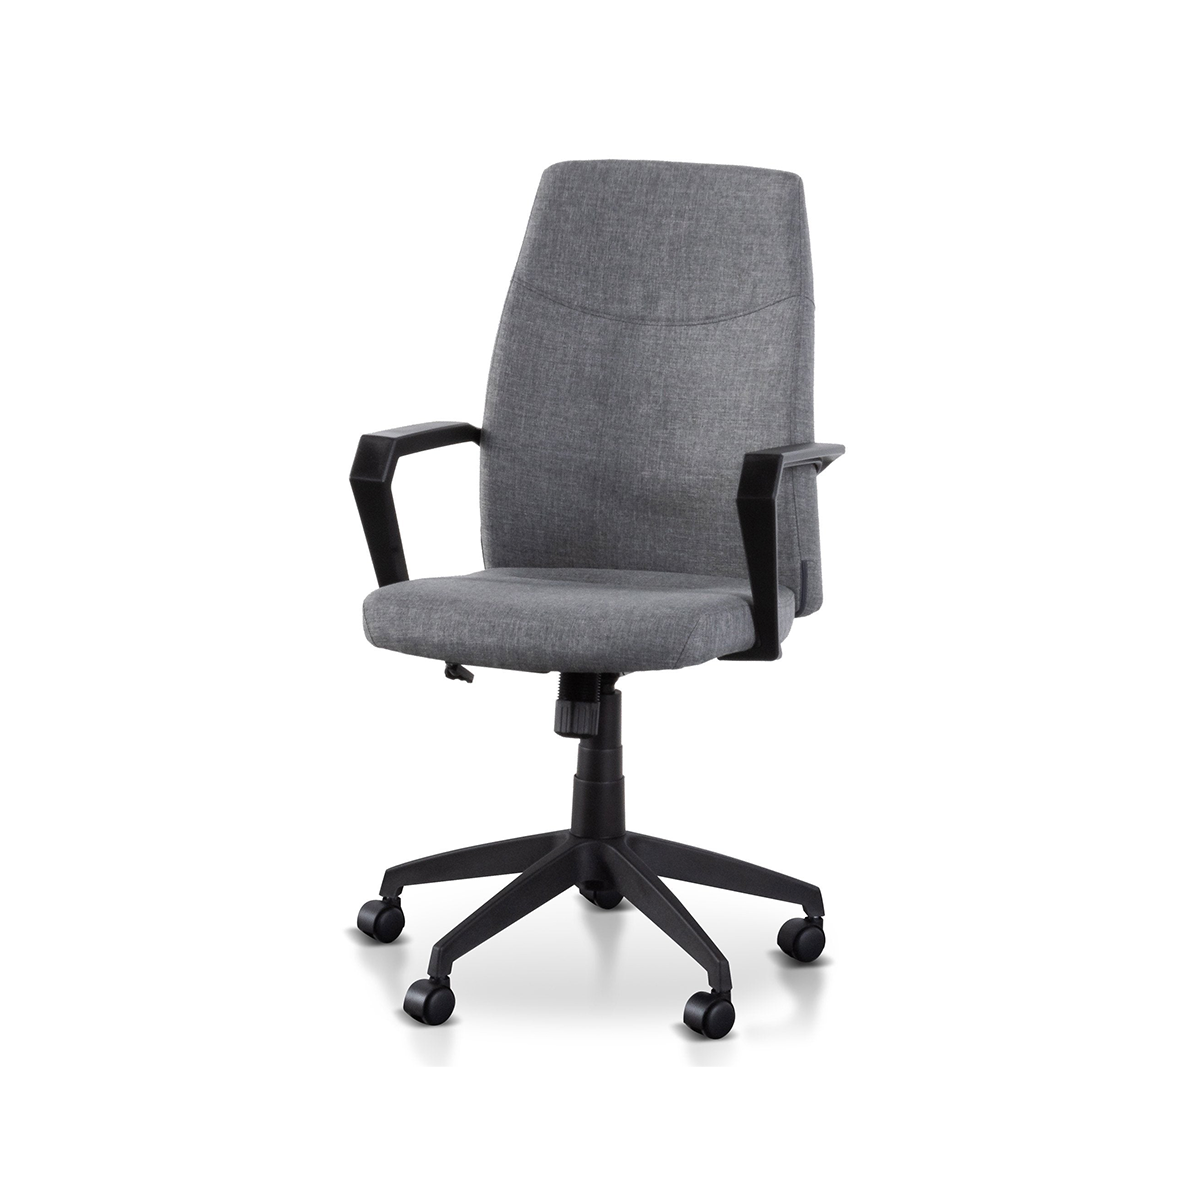 FondHouse Tansa Fabric Office Chair - Charcoal Grey with Black Base